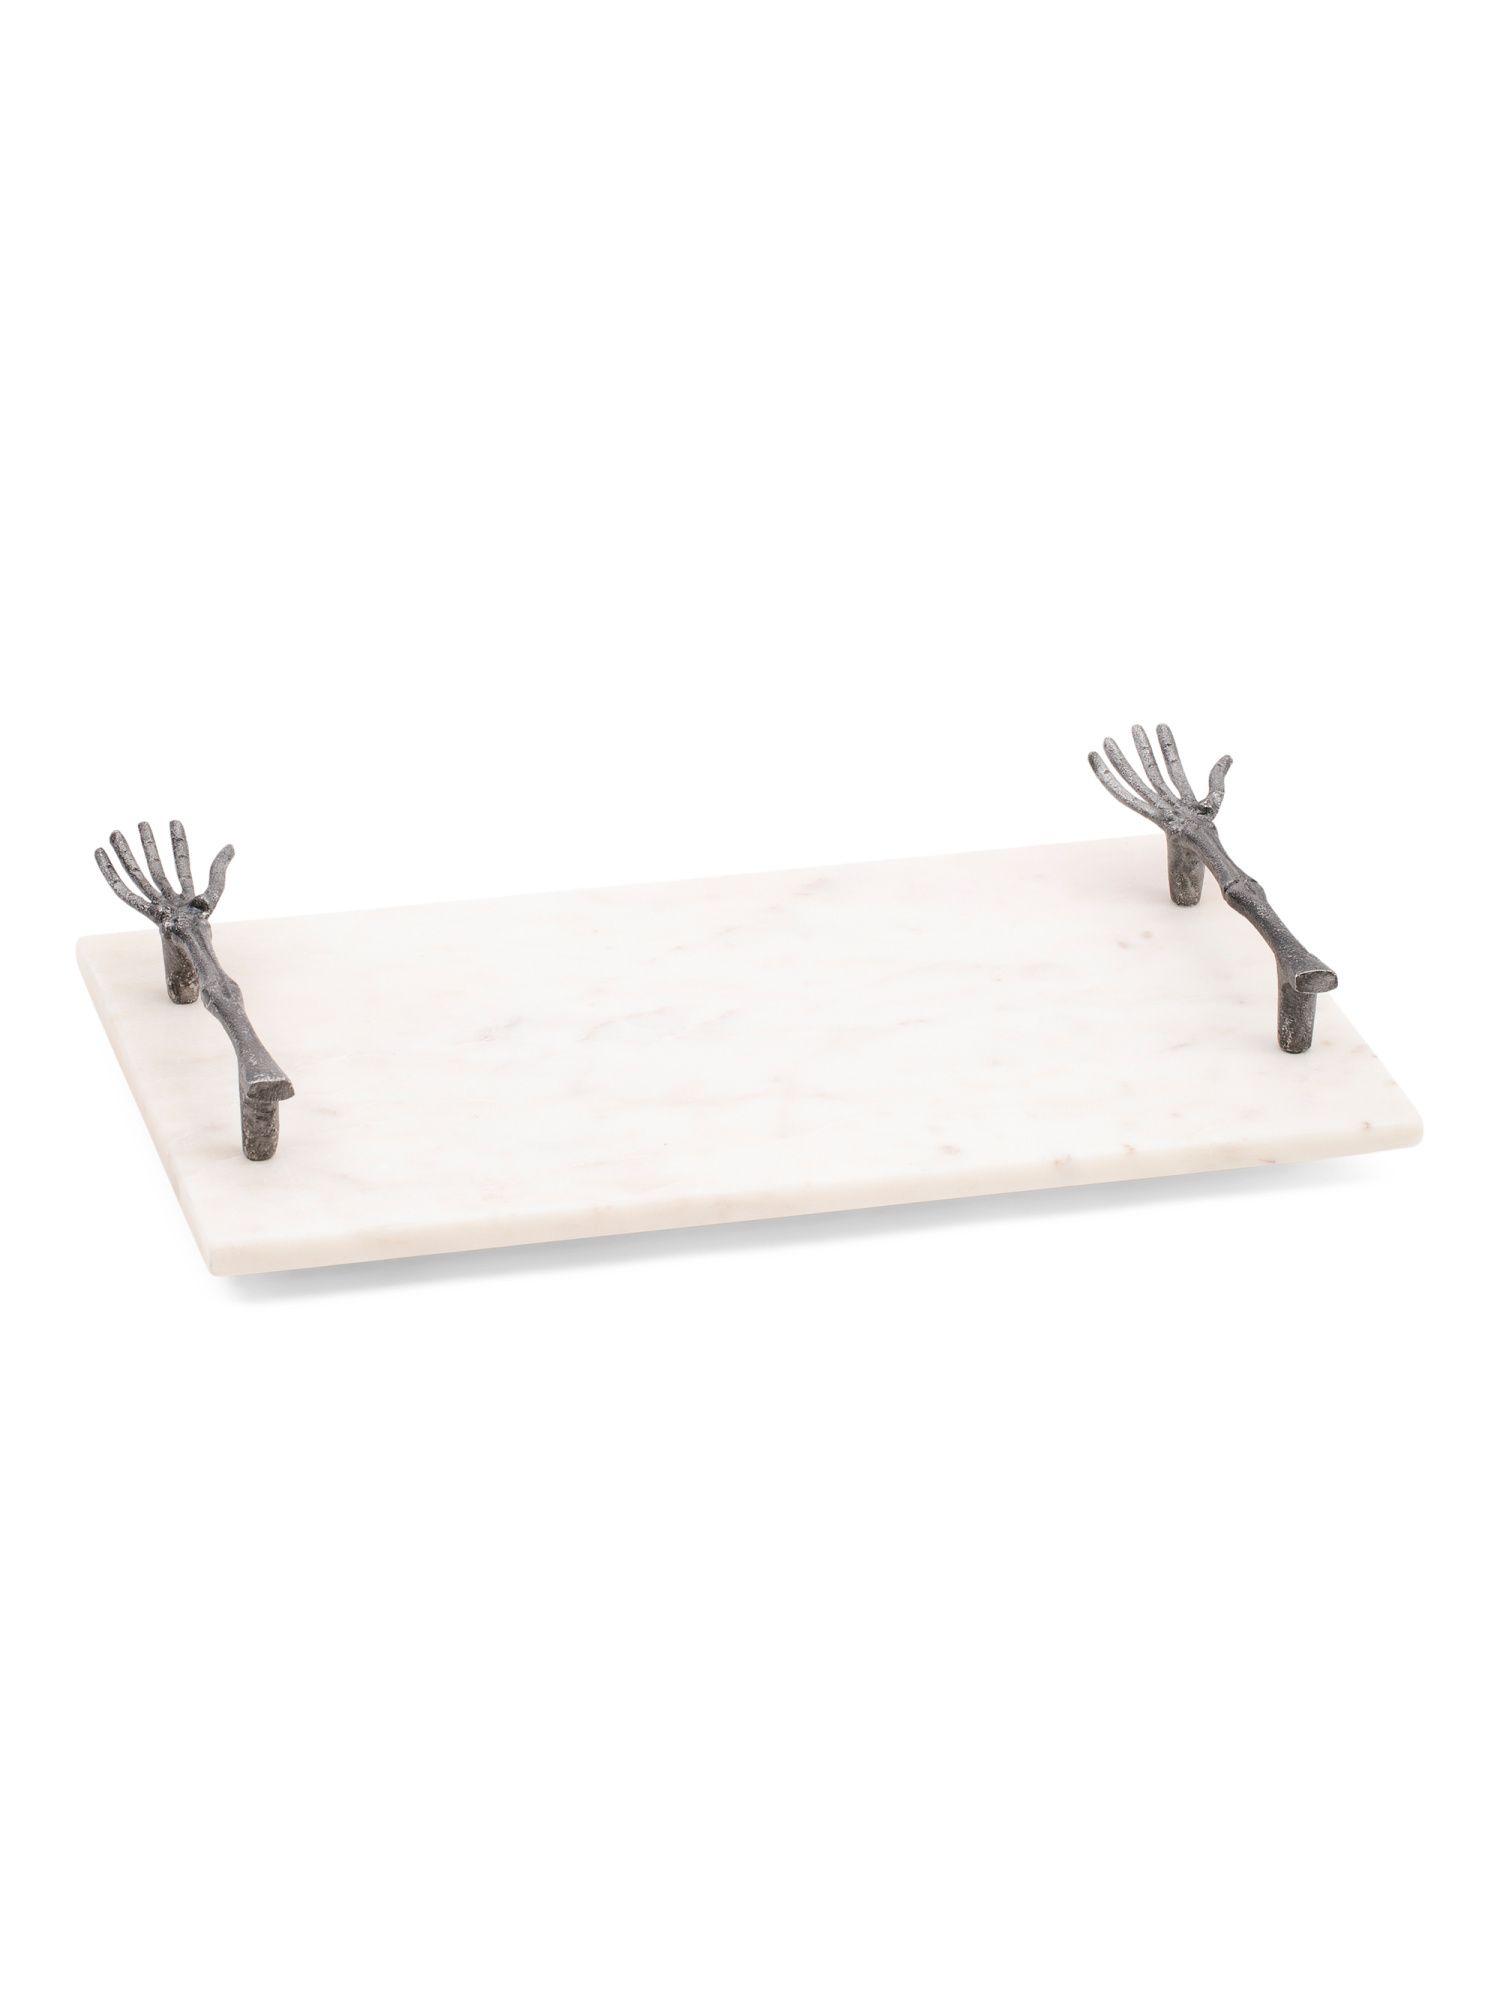 16x9 Marble Tray With Skeleton Hand Servers | Marshalls